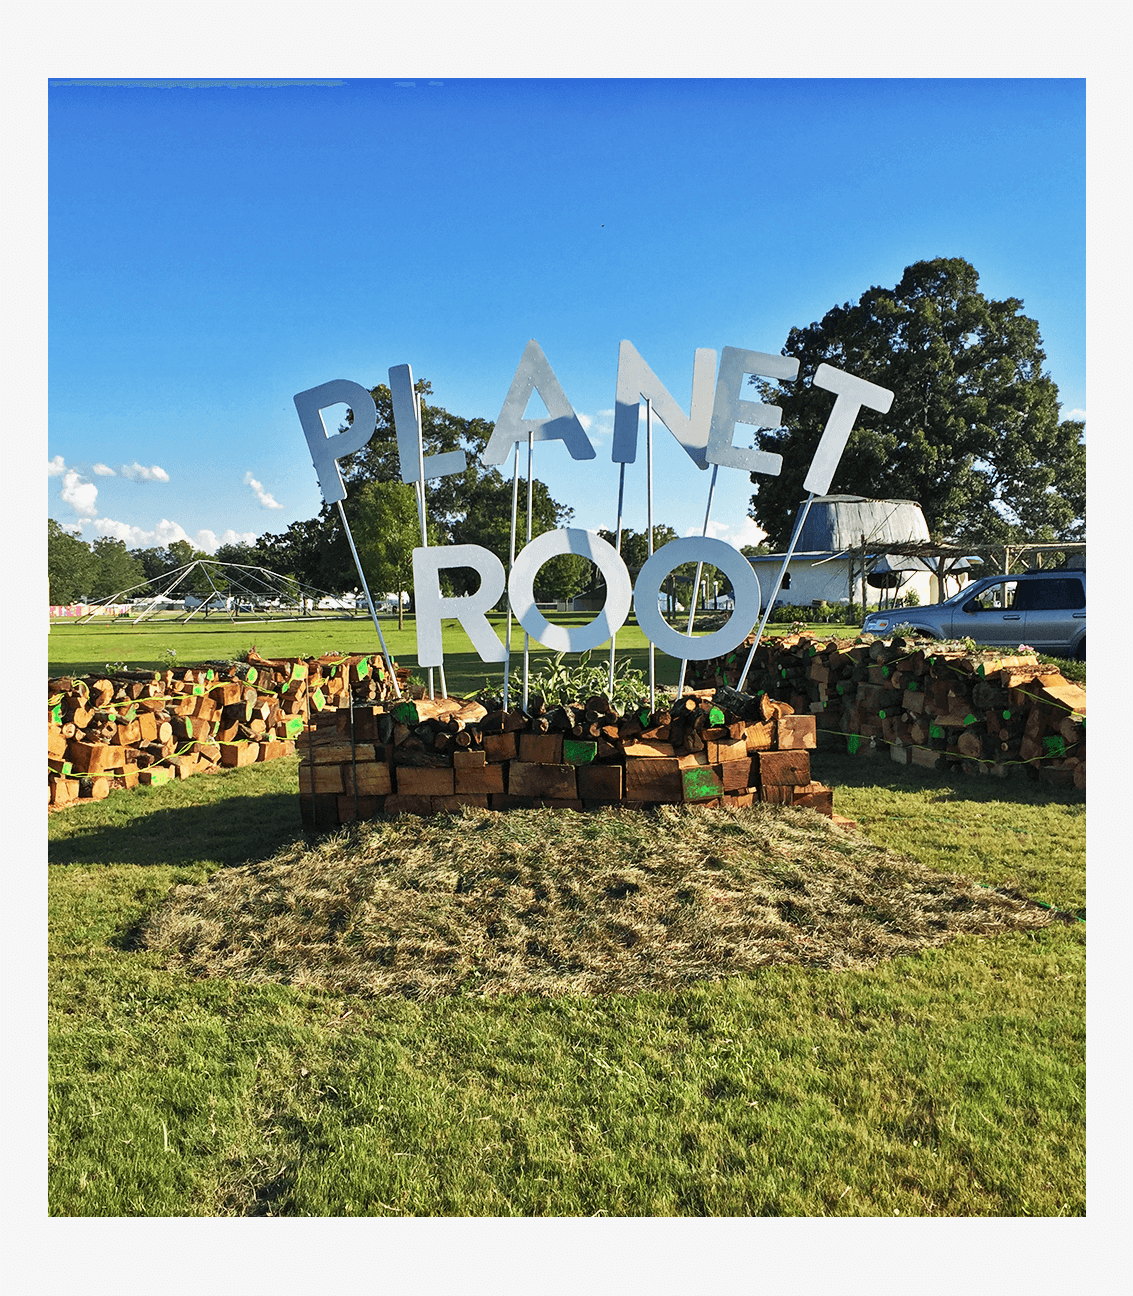 Progress Photo of the Planet Roo Entryway Sign and retaining walls for the Bonnaroo Music & Arts Festival in Manchester, Tennessee